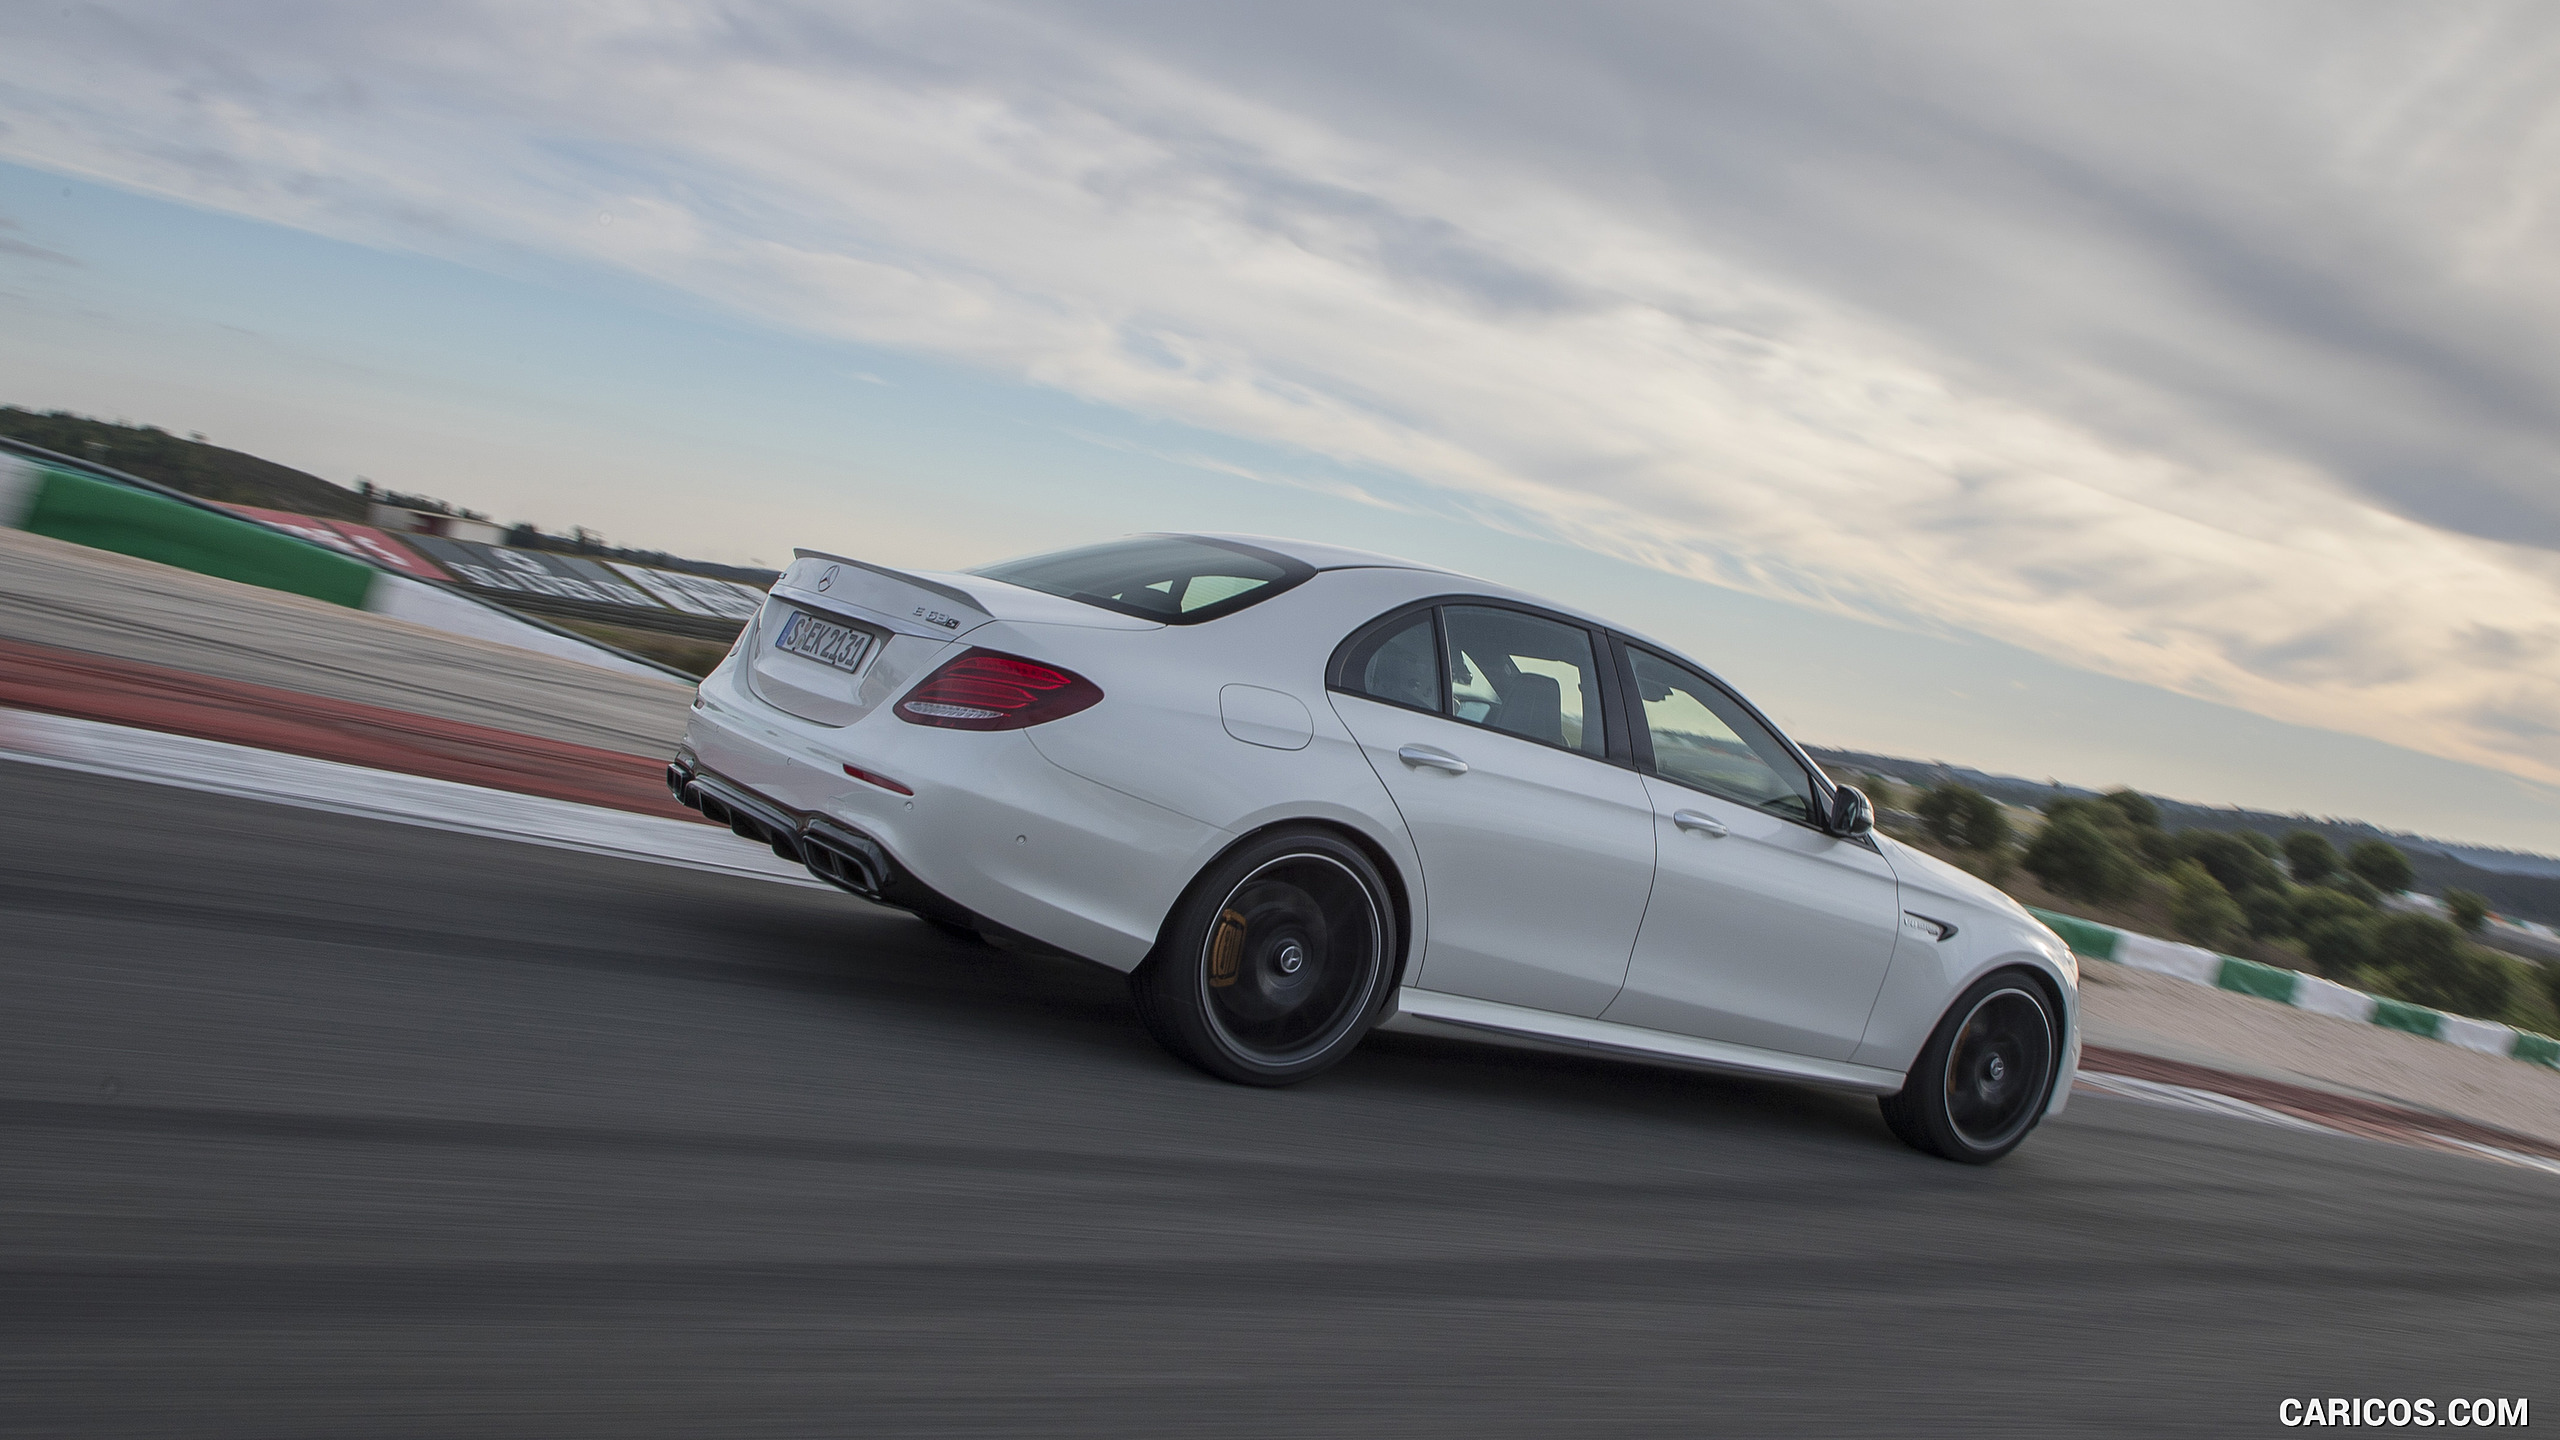 2018 Mercedes-AMG E63 S 4MATIC+ - Side, #120 of 323